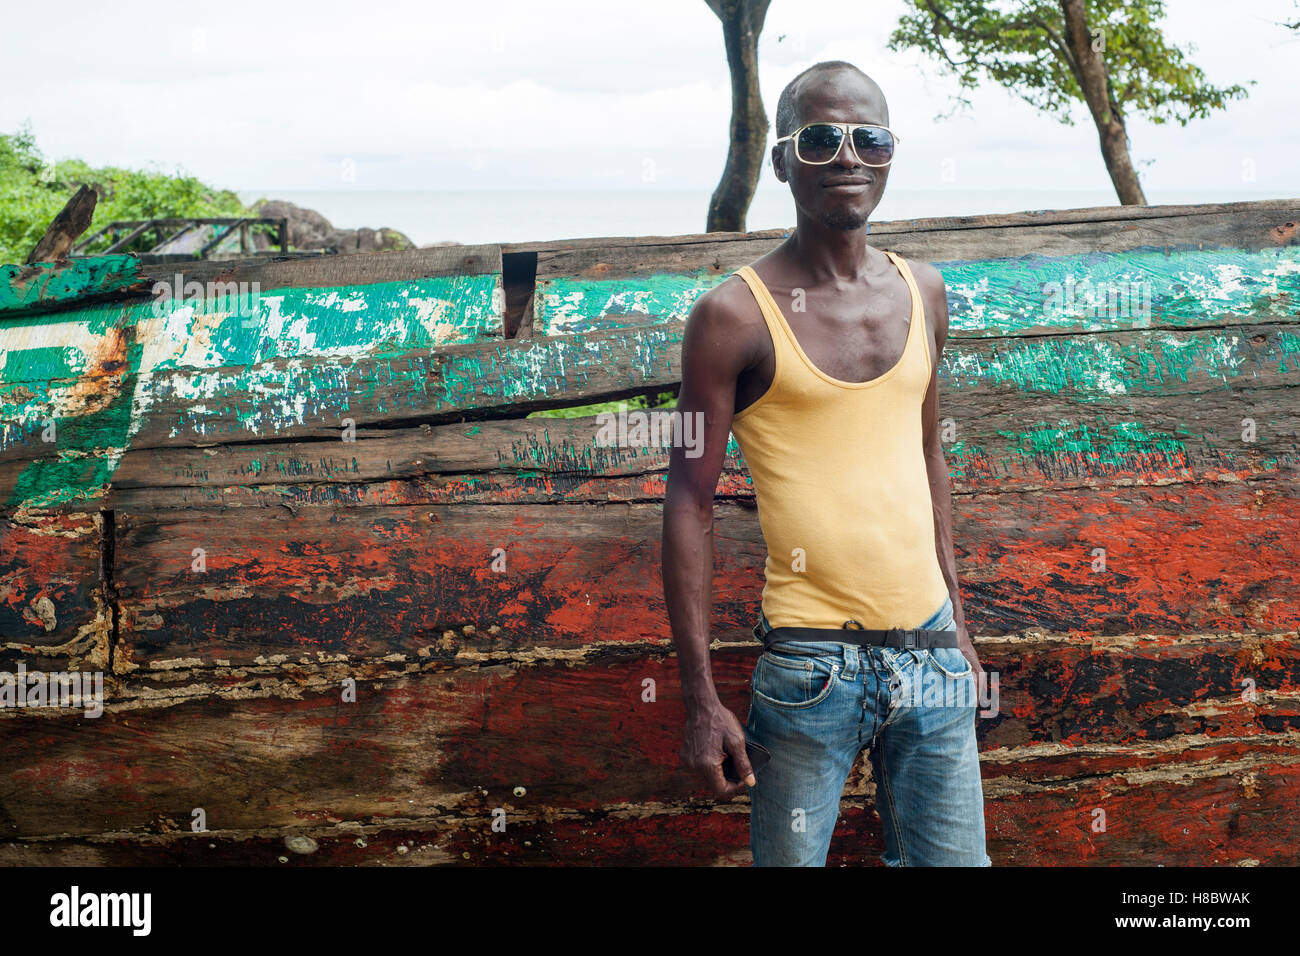 Local fisherman posing in front of a wooden fishing boat in the Kent fishing village, Sierra Leone Stock Photo